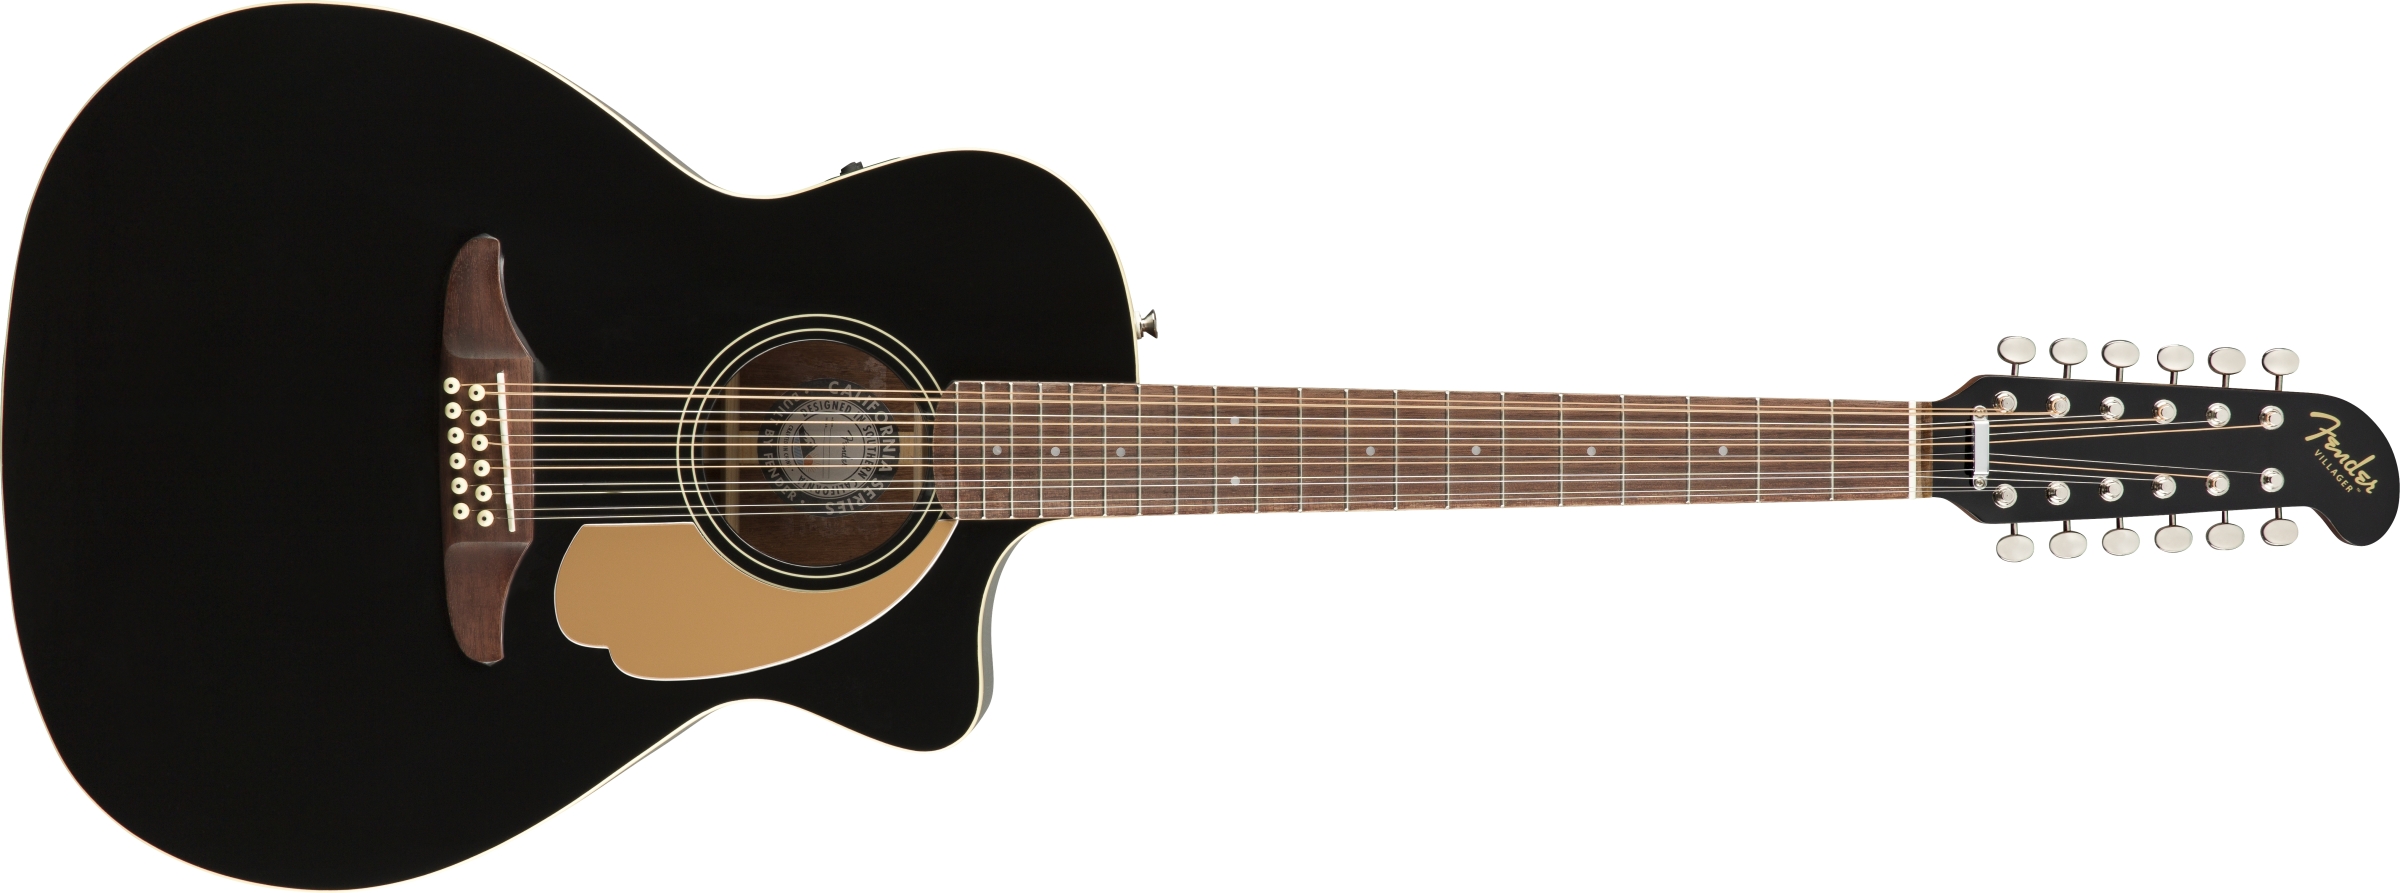 Fender Villager 12-String colors available